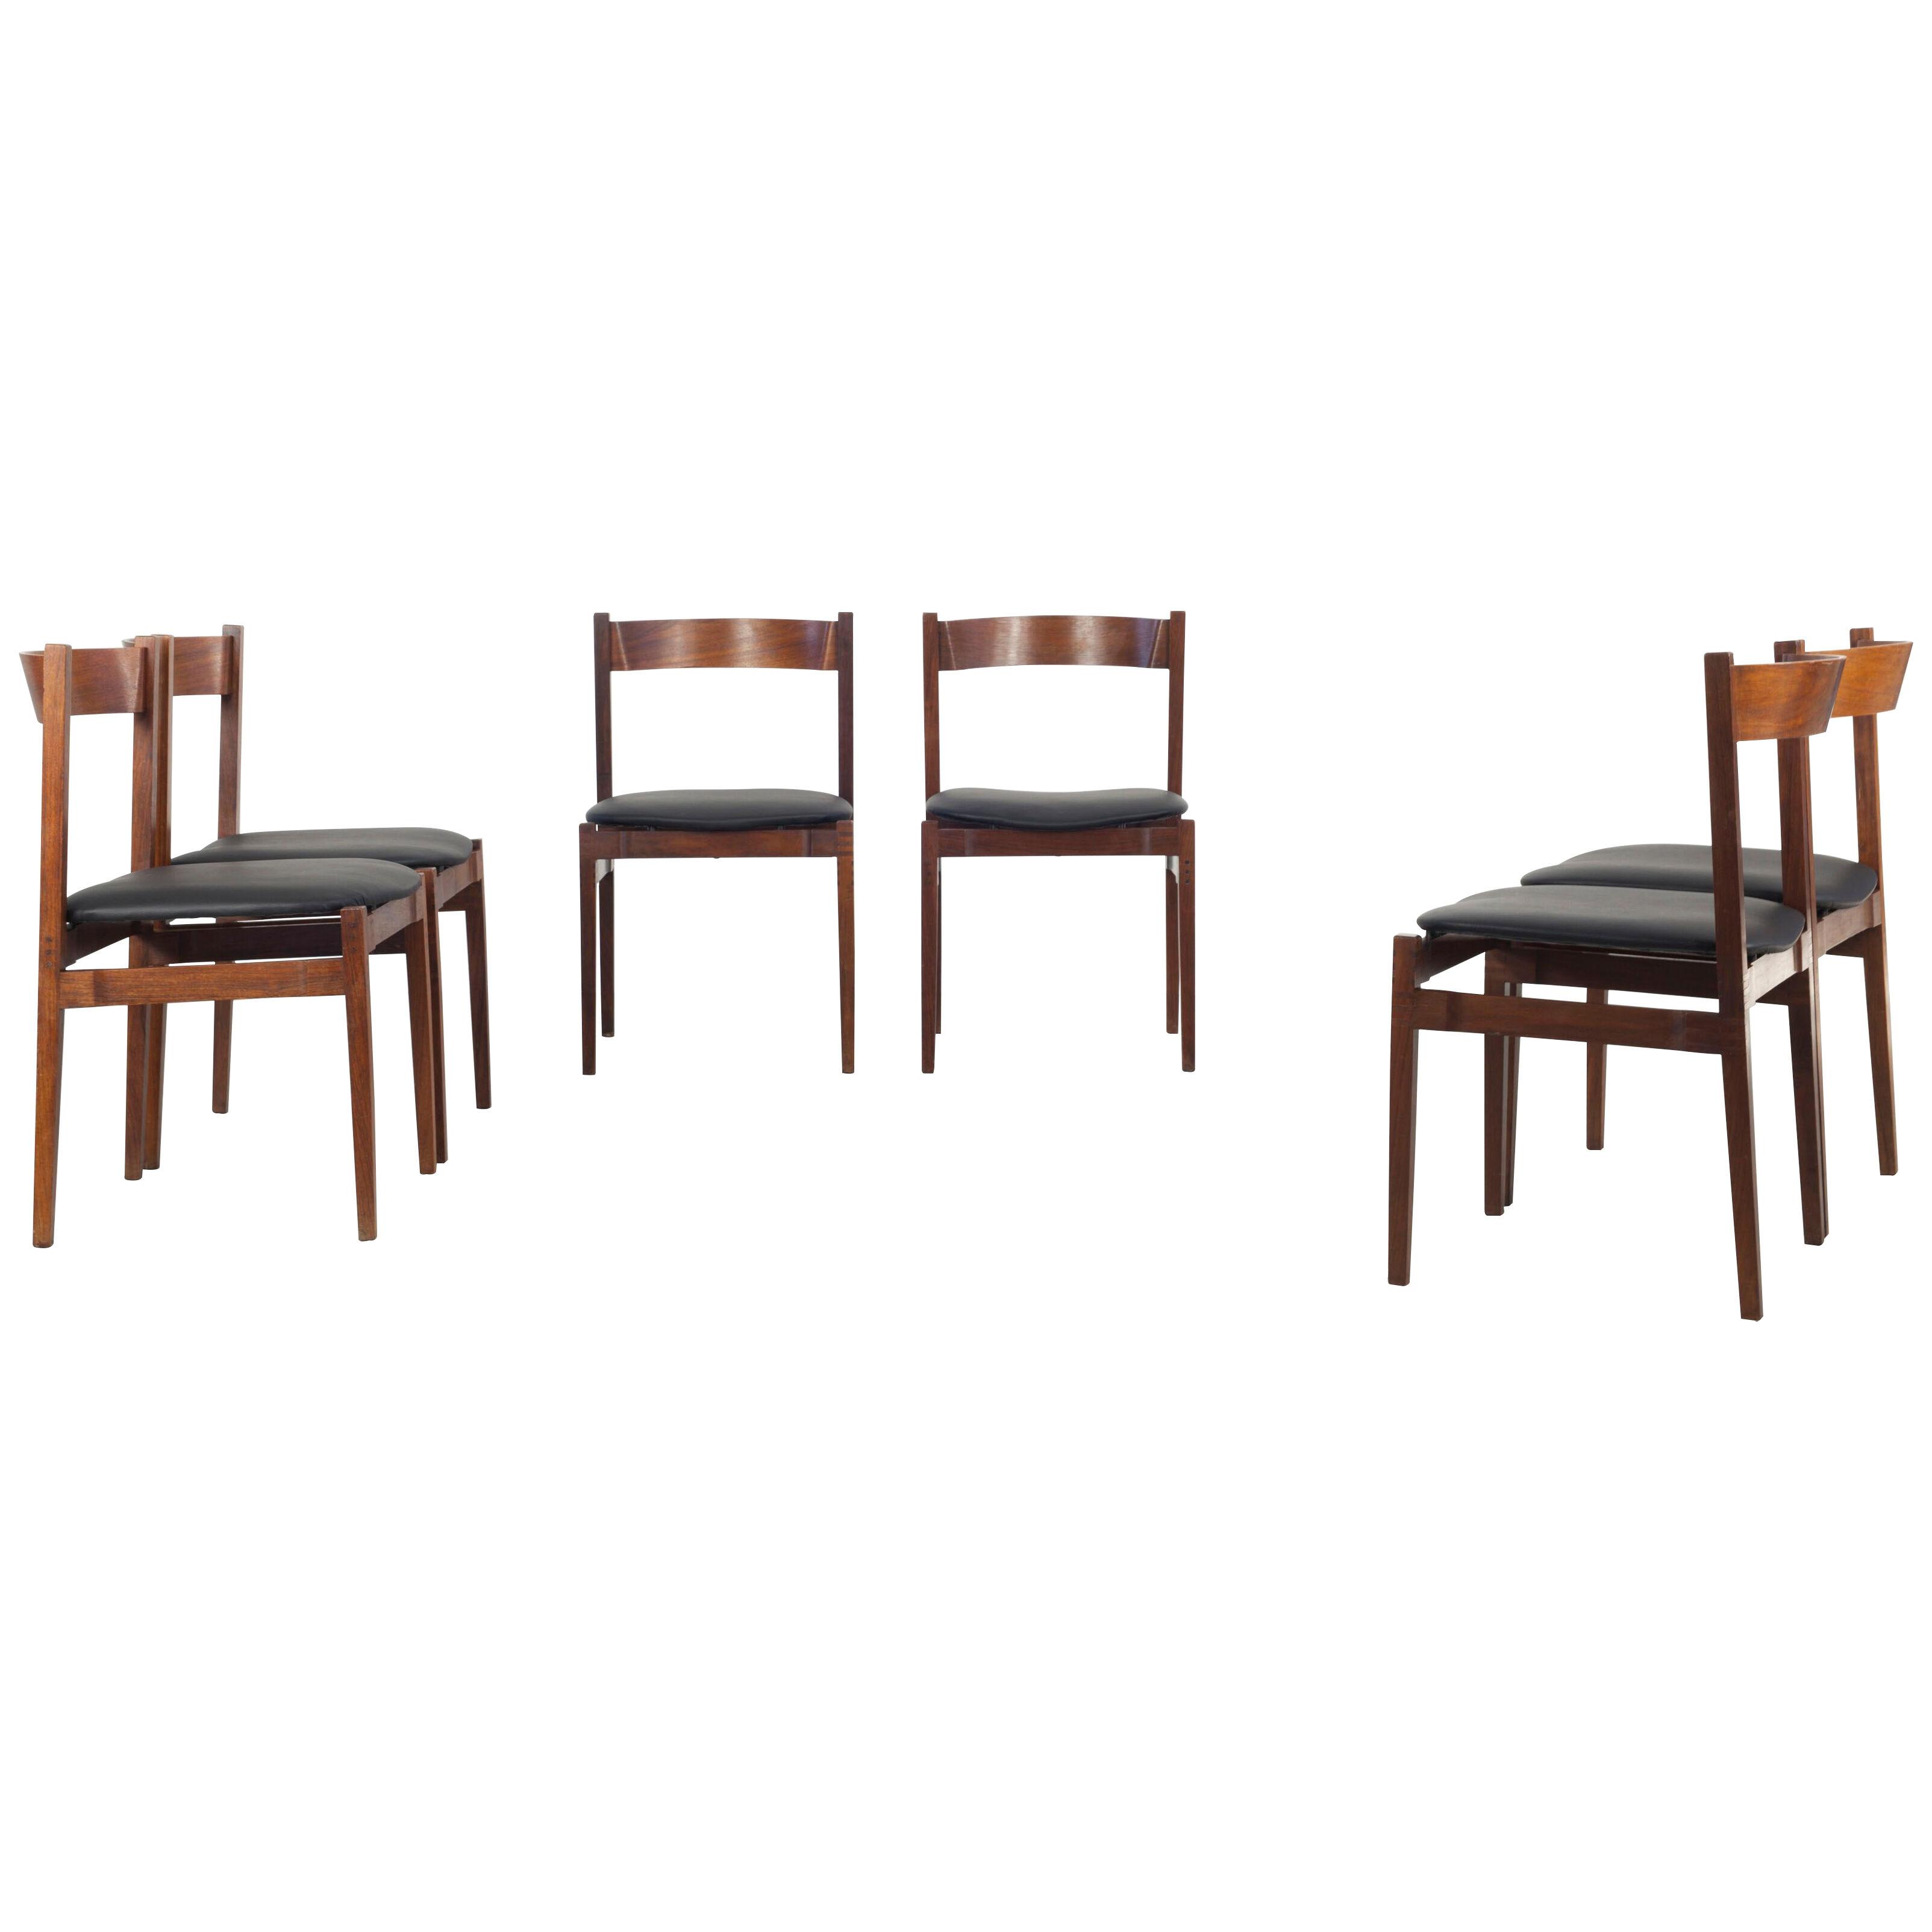 Set of 6 "Model 101" Dining Chairs, Designed by Gianfranco Frattini, Cassina